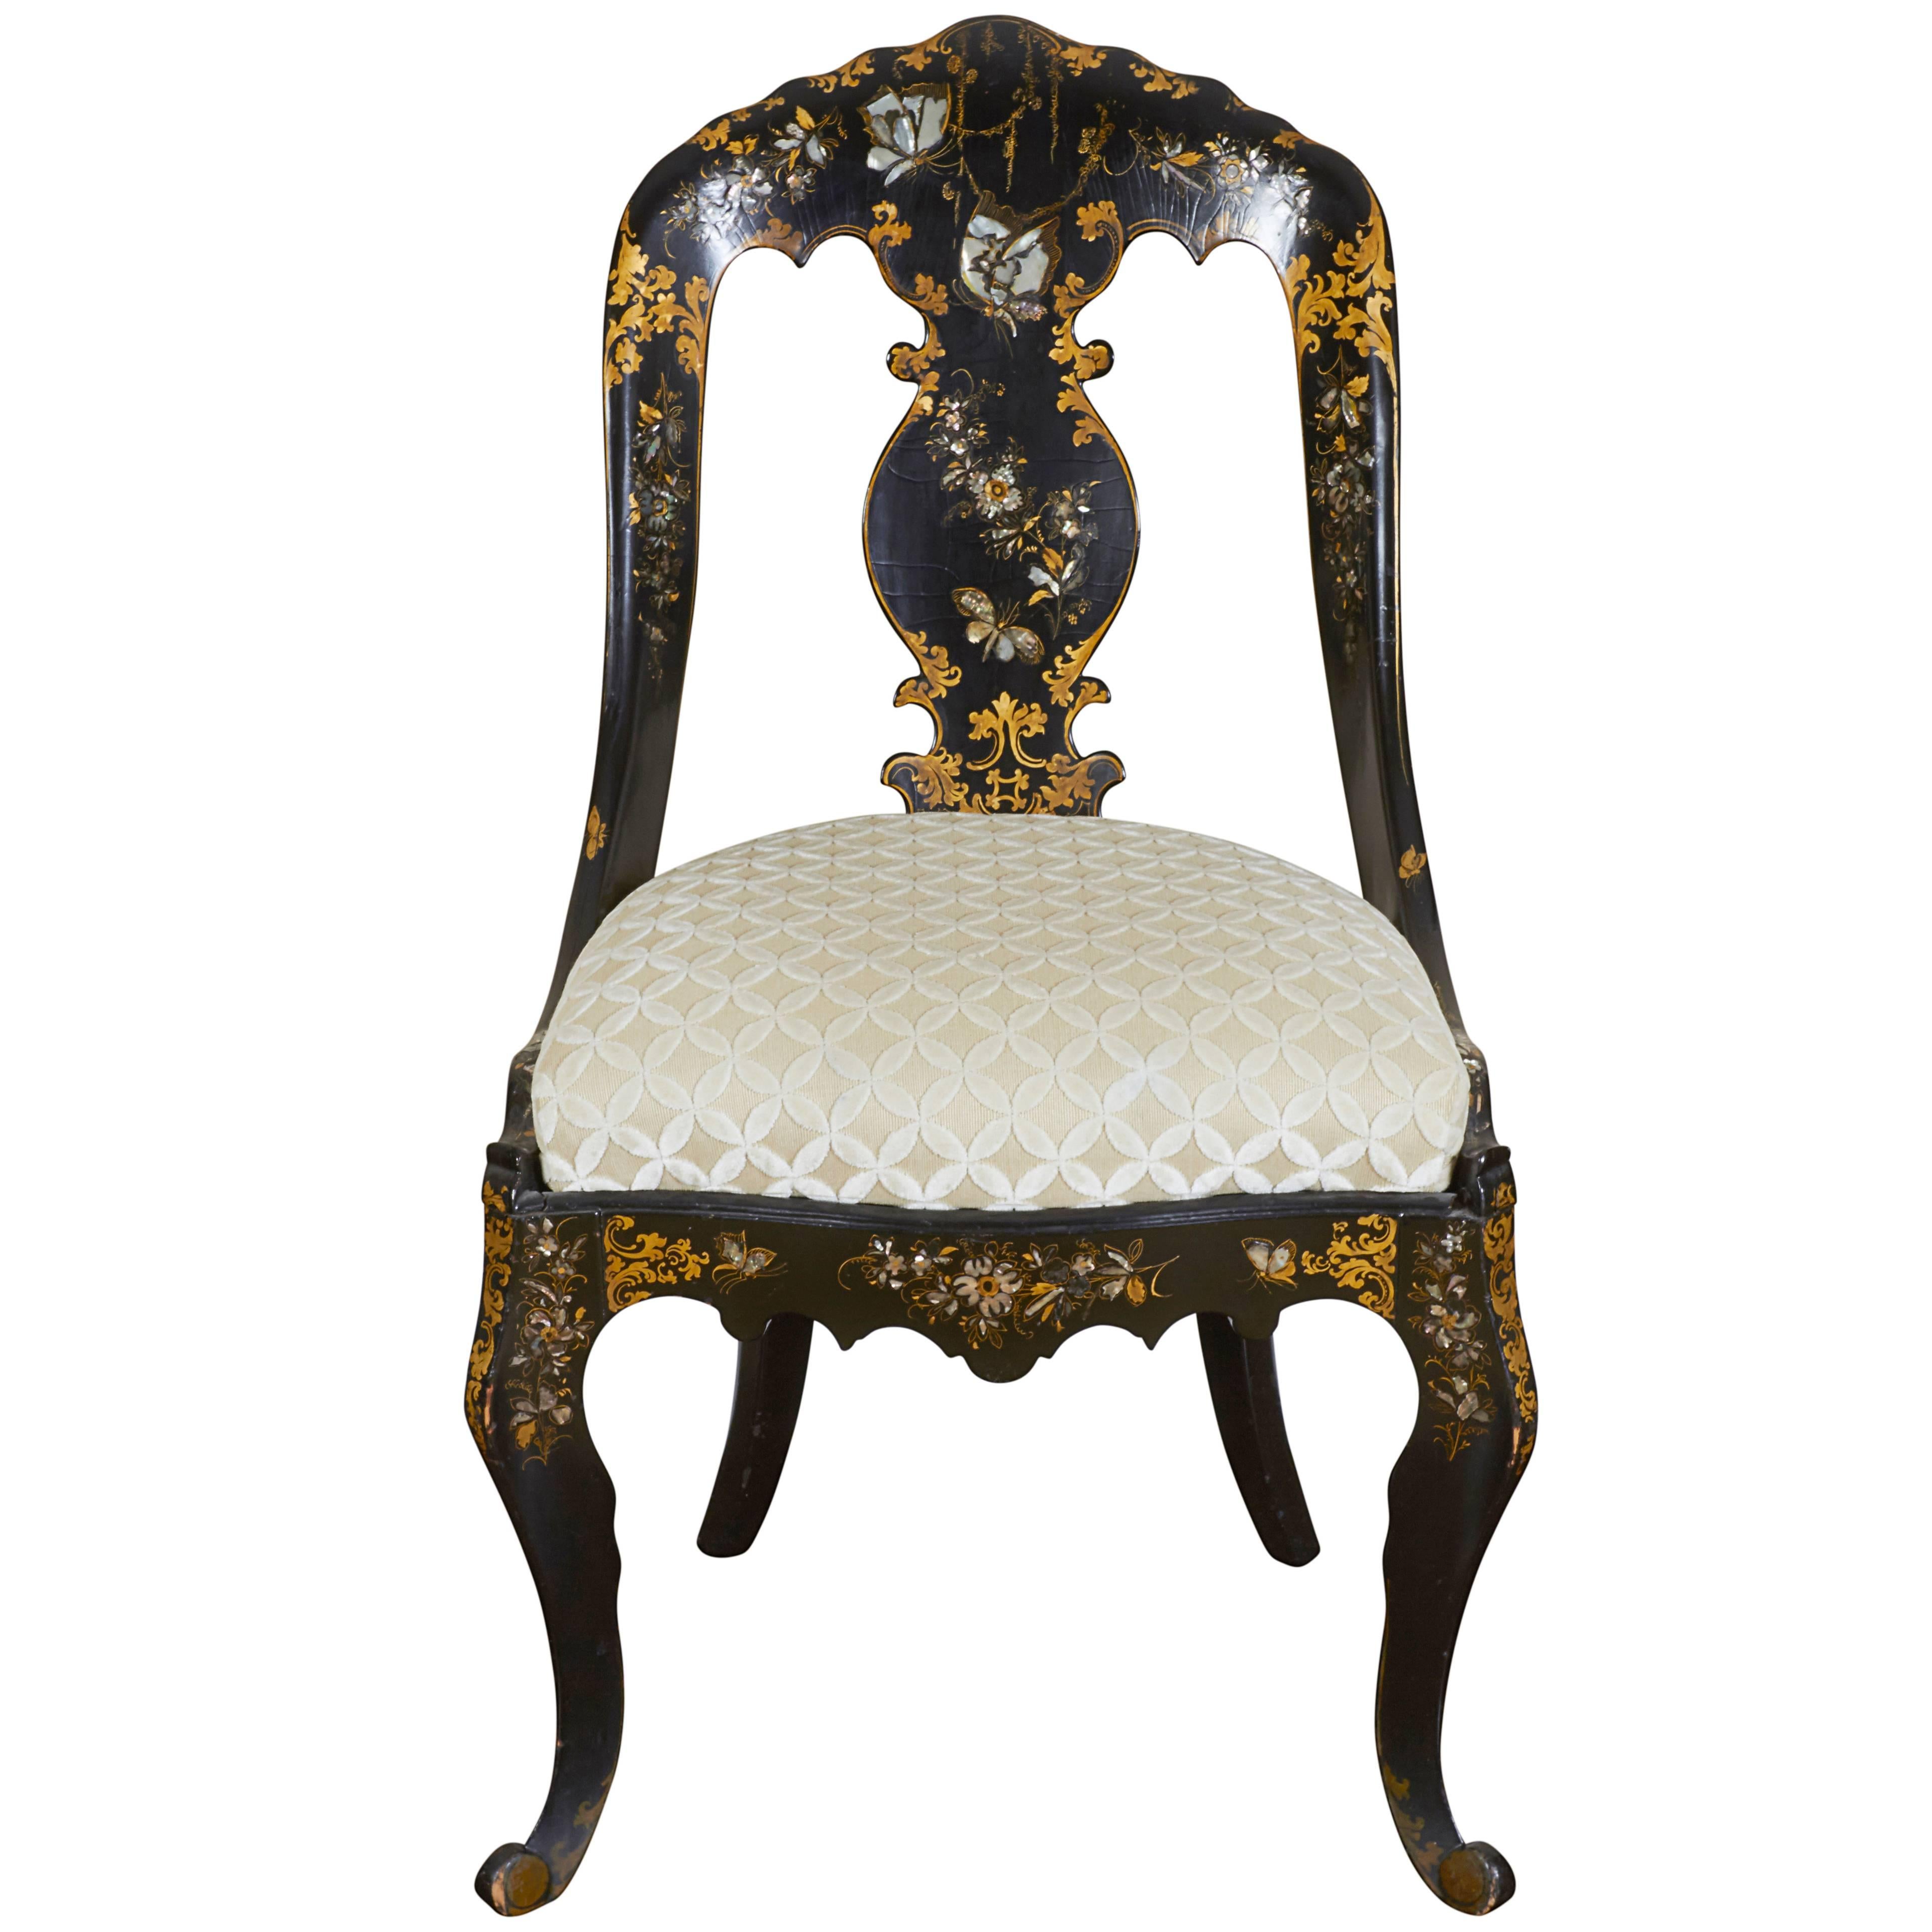 19th Century Black Lacquer Papier Mache Chair with Mother-of-pearl Inlay